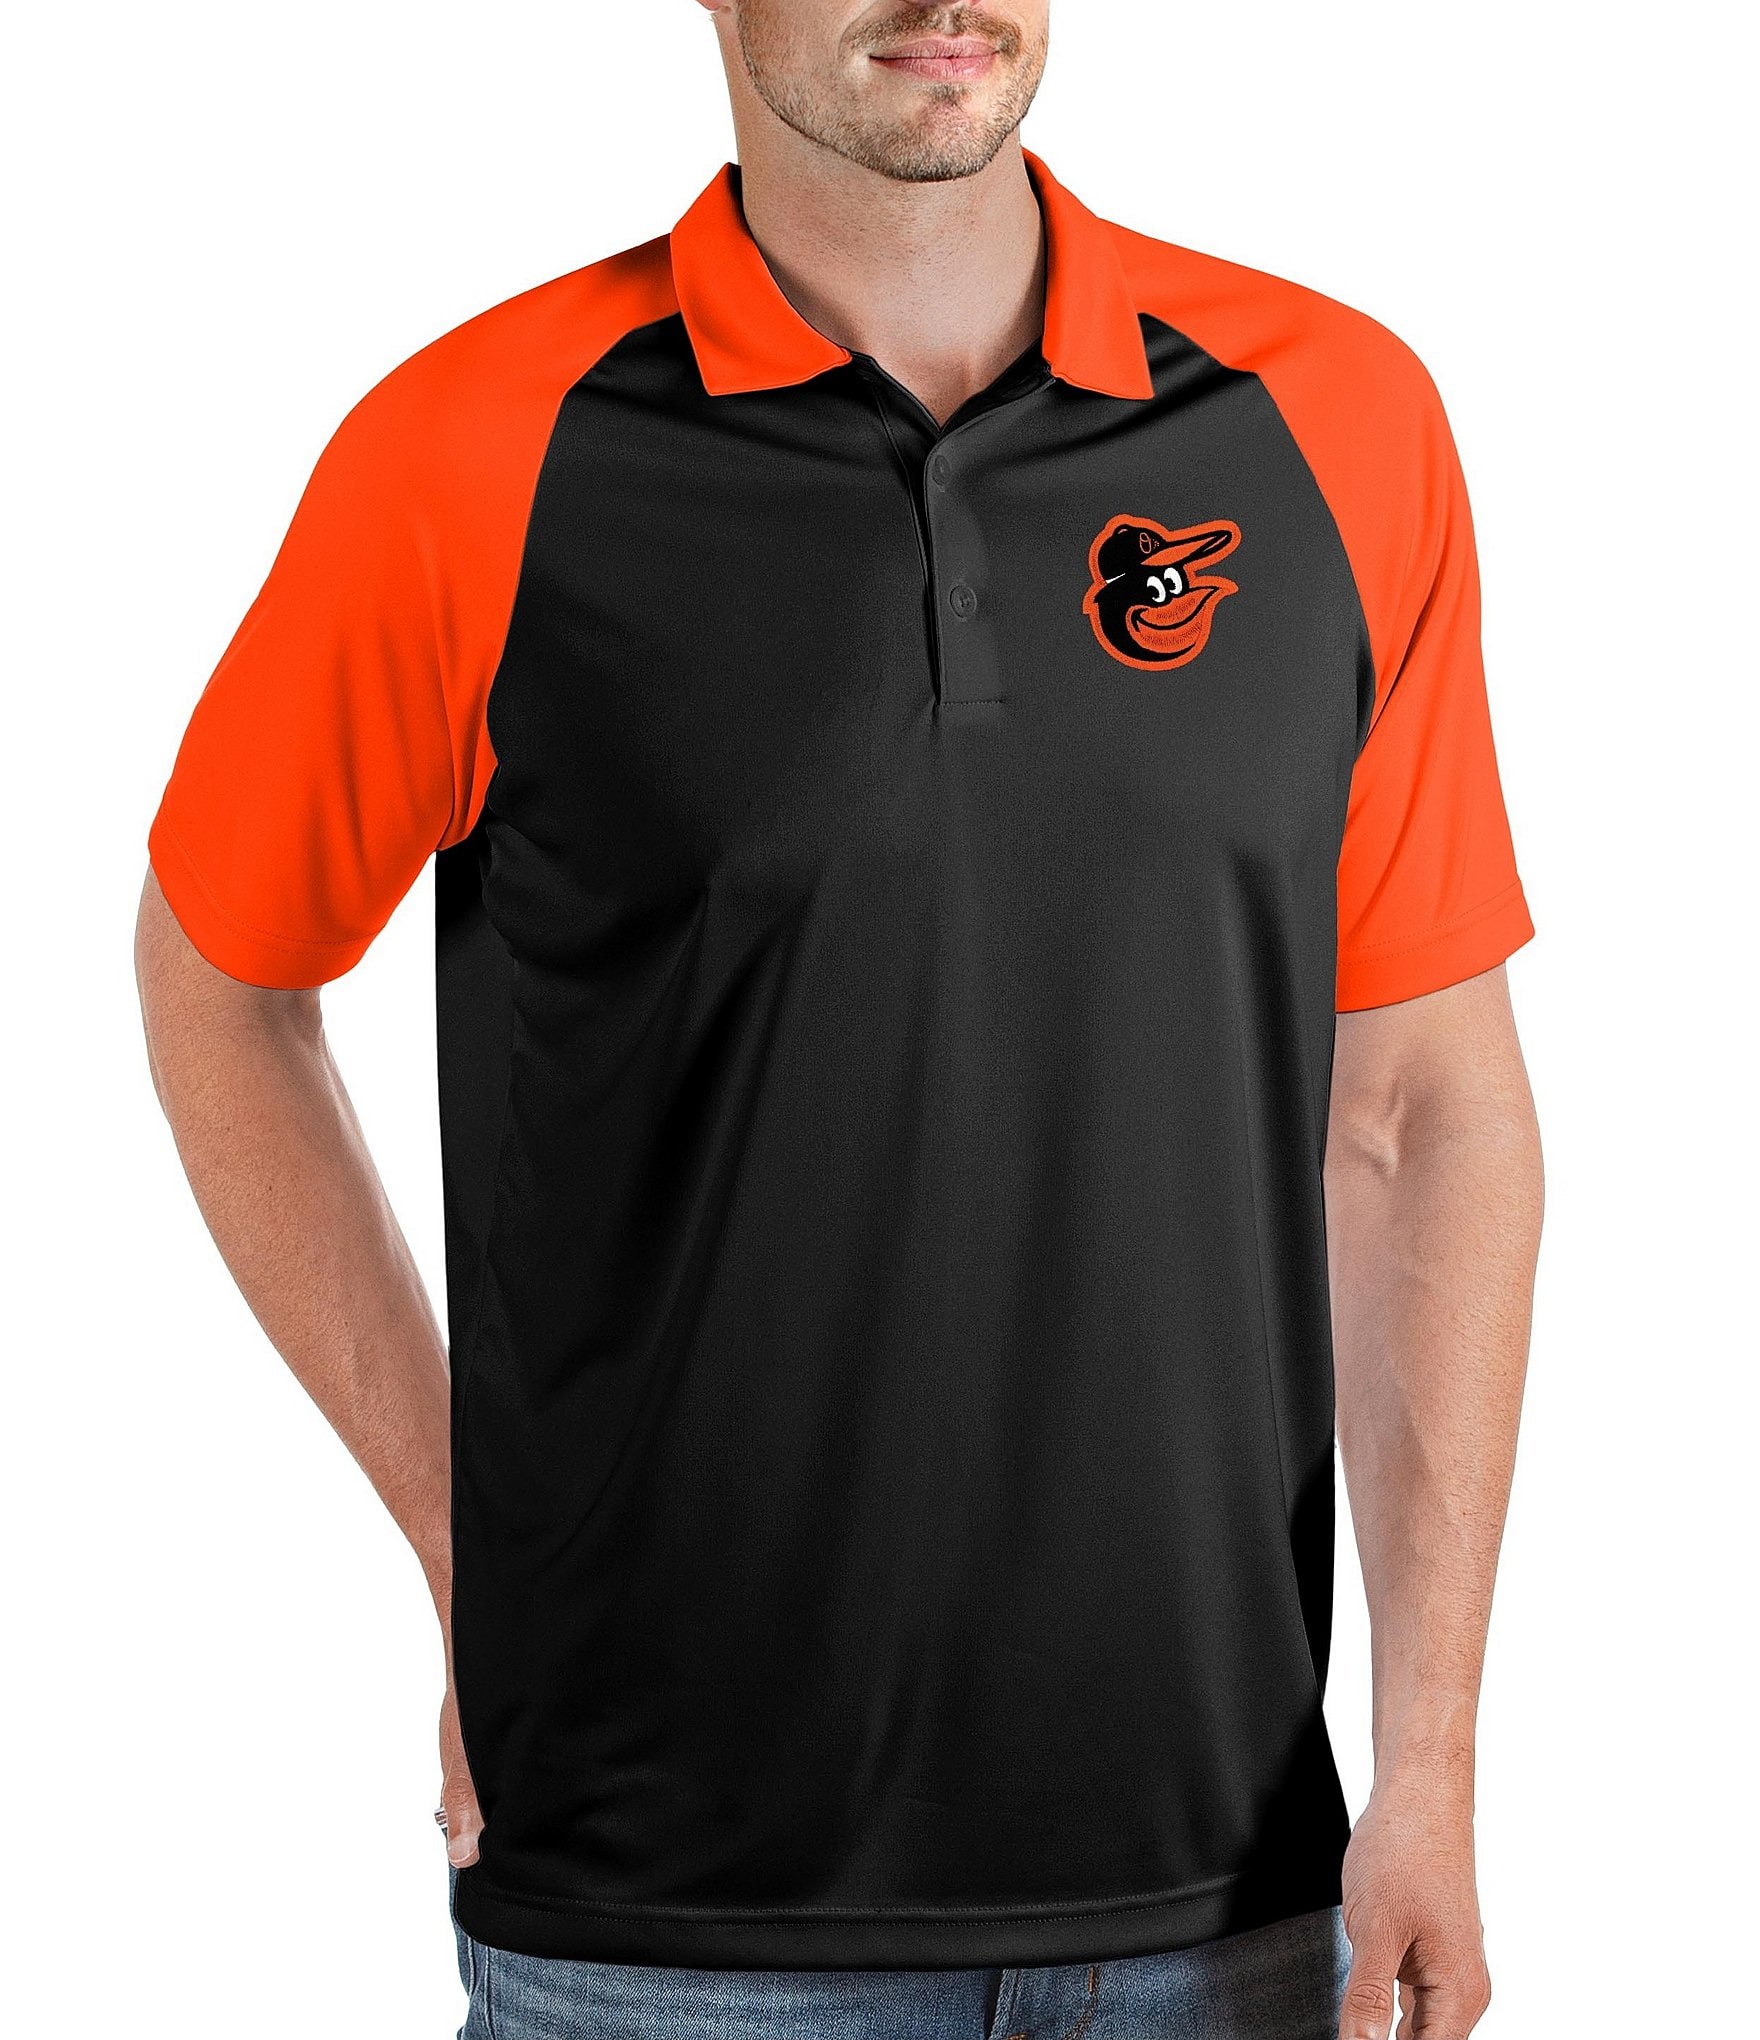 Baltimore Orioles Nike Brand Dri-Fit Short Sleeved Polo - Size